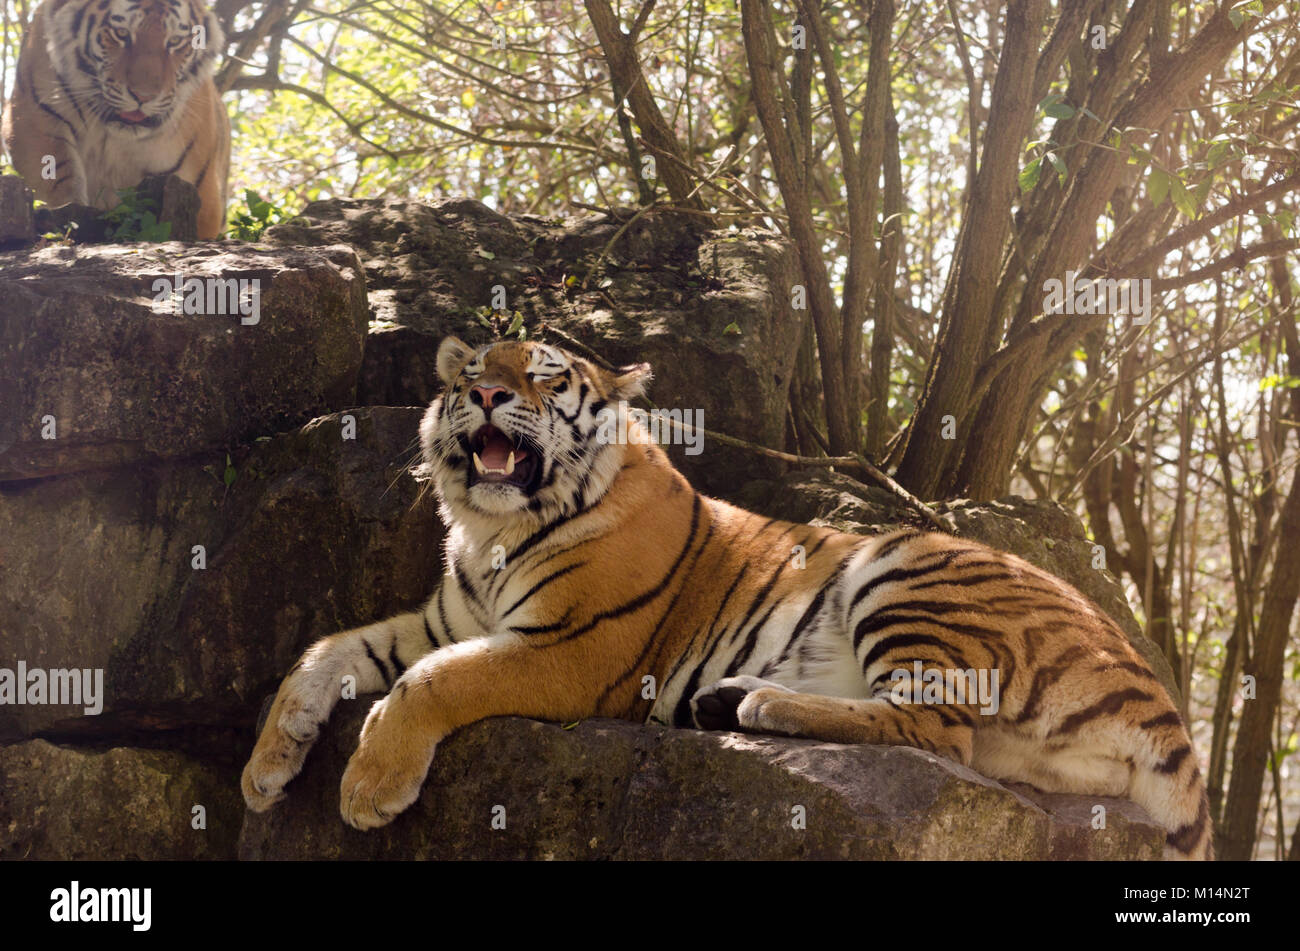 An Amur tiger prowling in the undergrowth Stock Photo